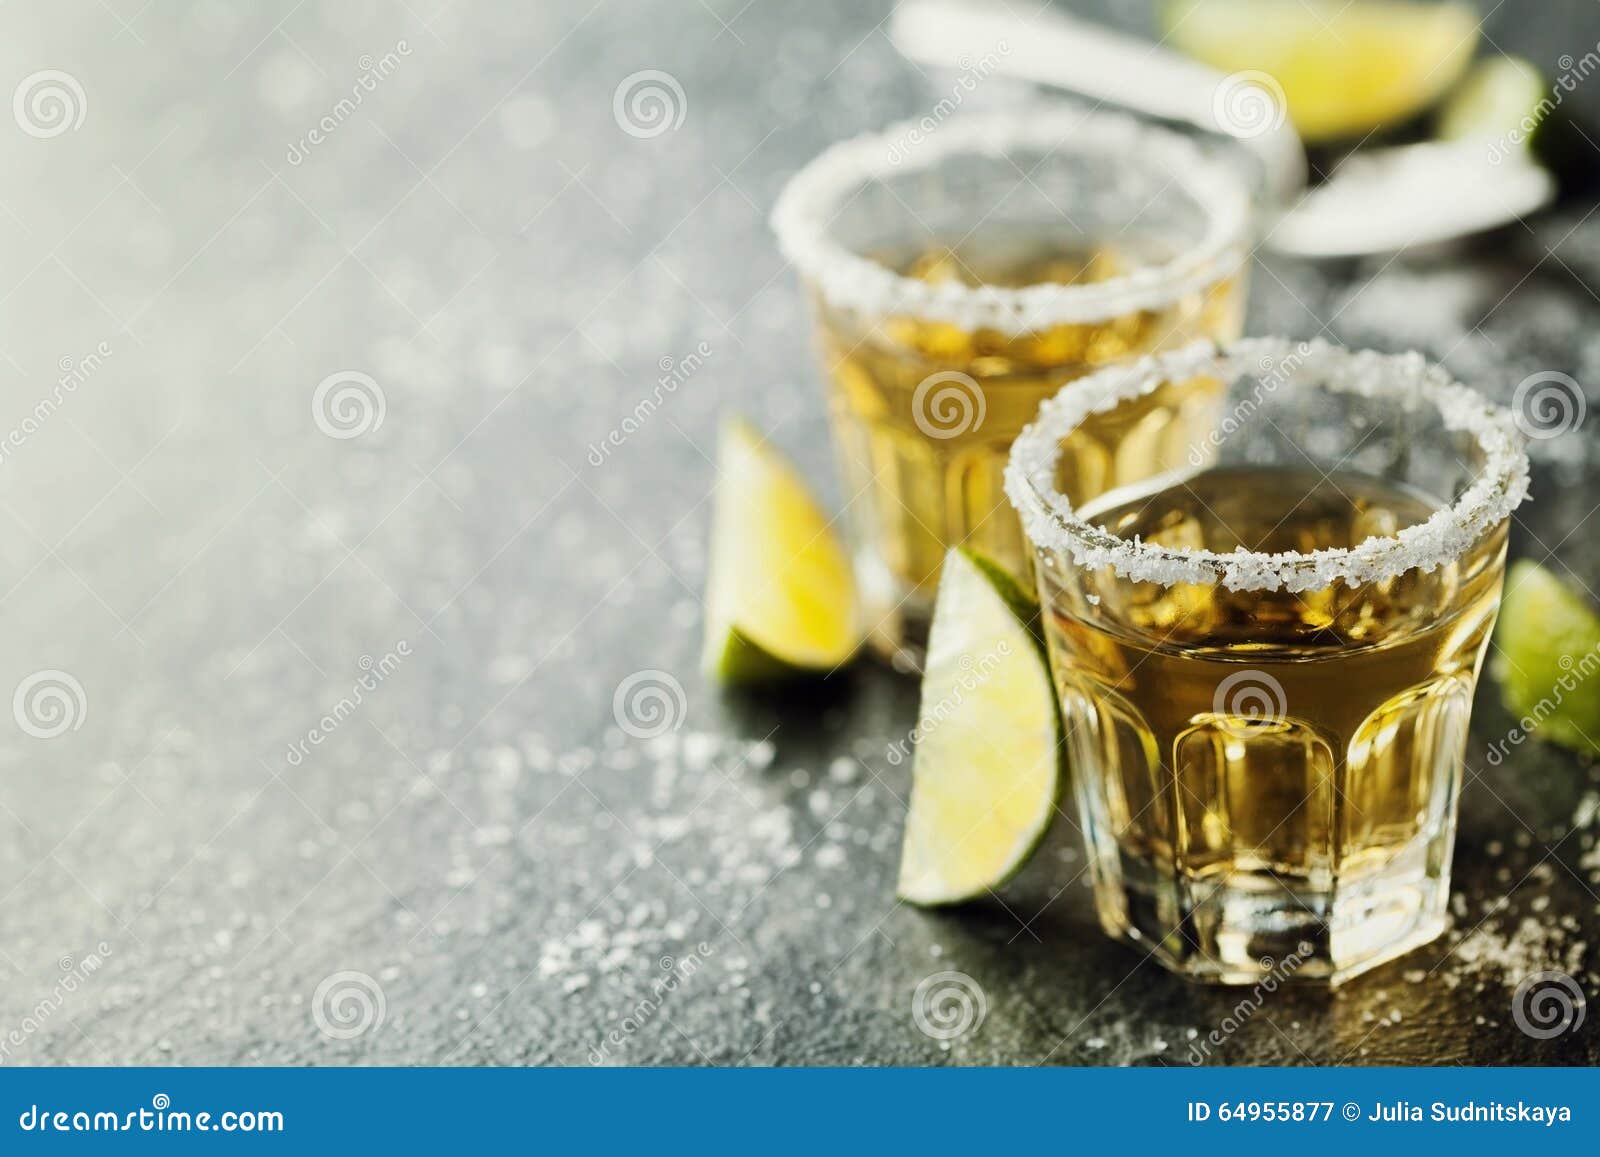 tequila shot with lime and sea salt on black table